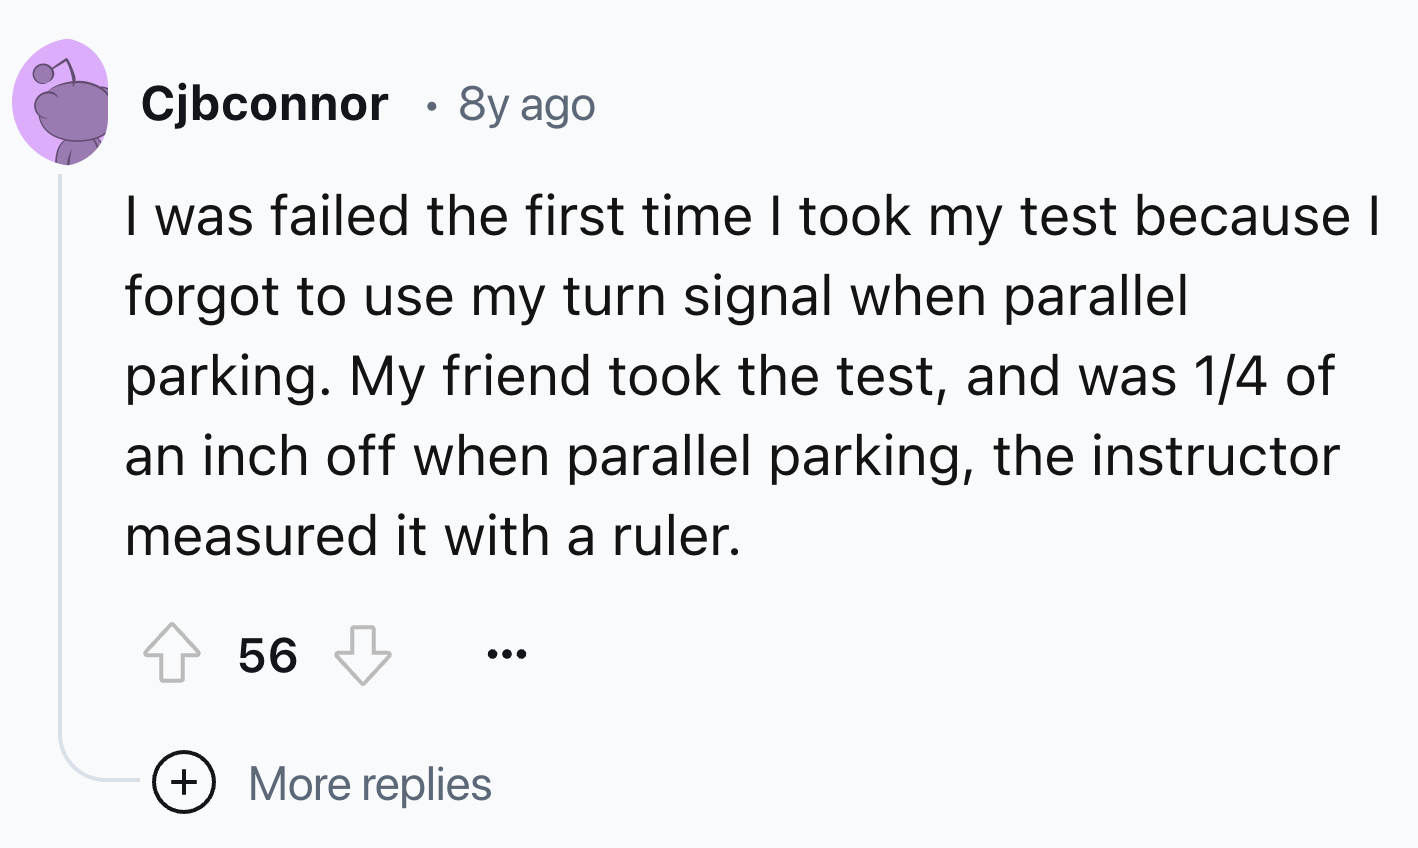 number - Cjbconnor 8y ago I was failed the first time I took my test because I forgot to use my turn signal when parallel parking. My friend took the test, and was 14 of an inch off when parallel parking, the instructor measured it with a ruler. 56 More r